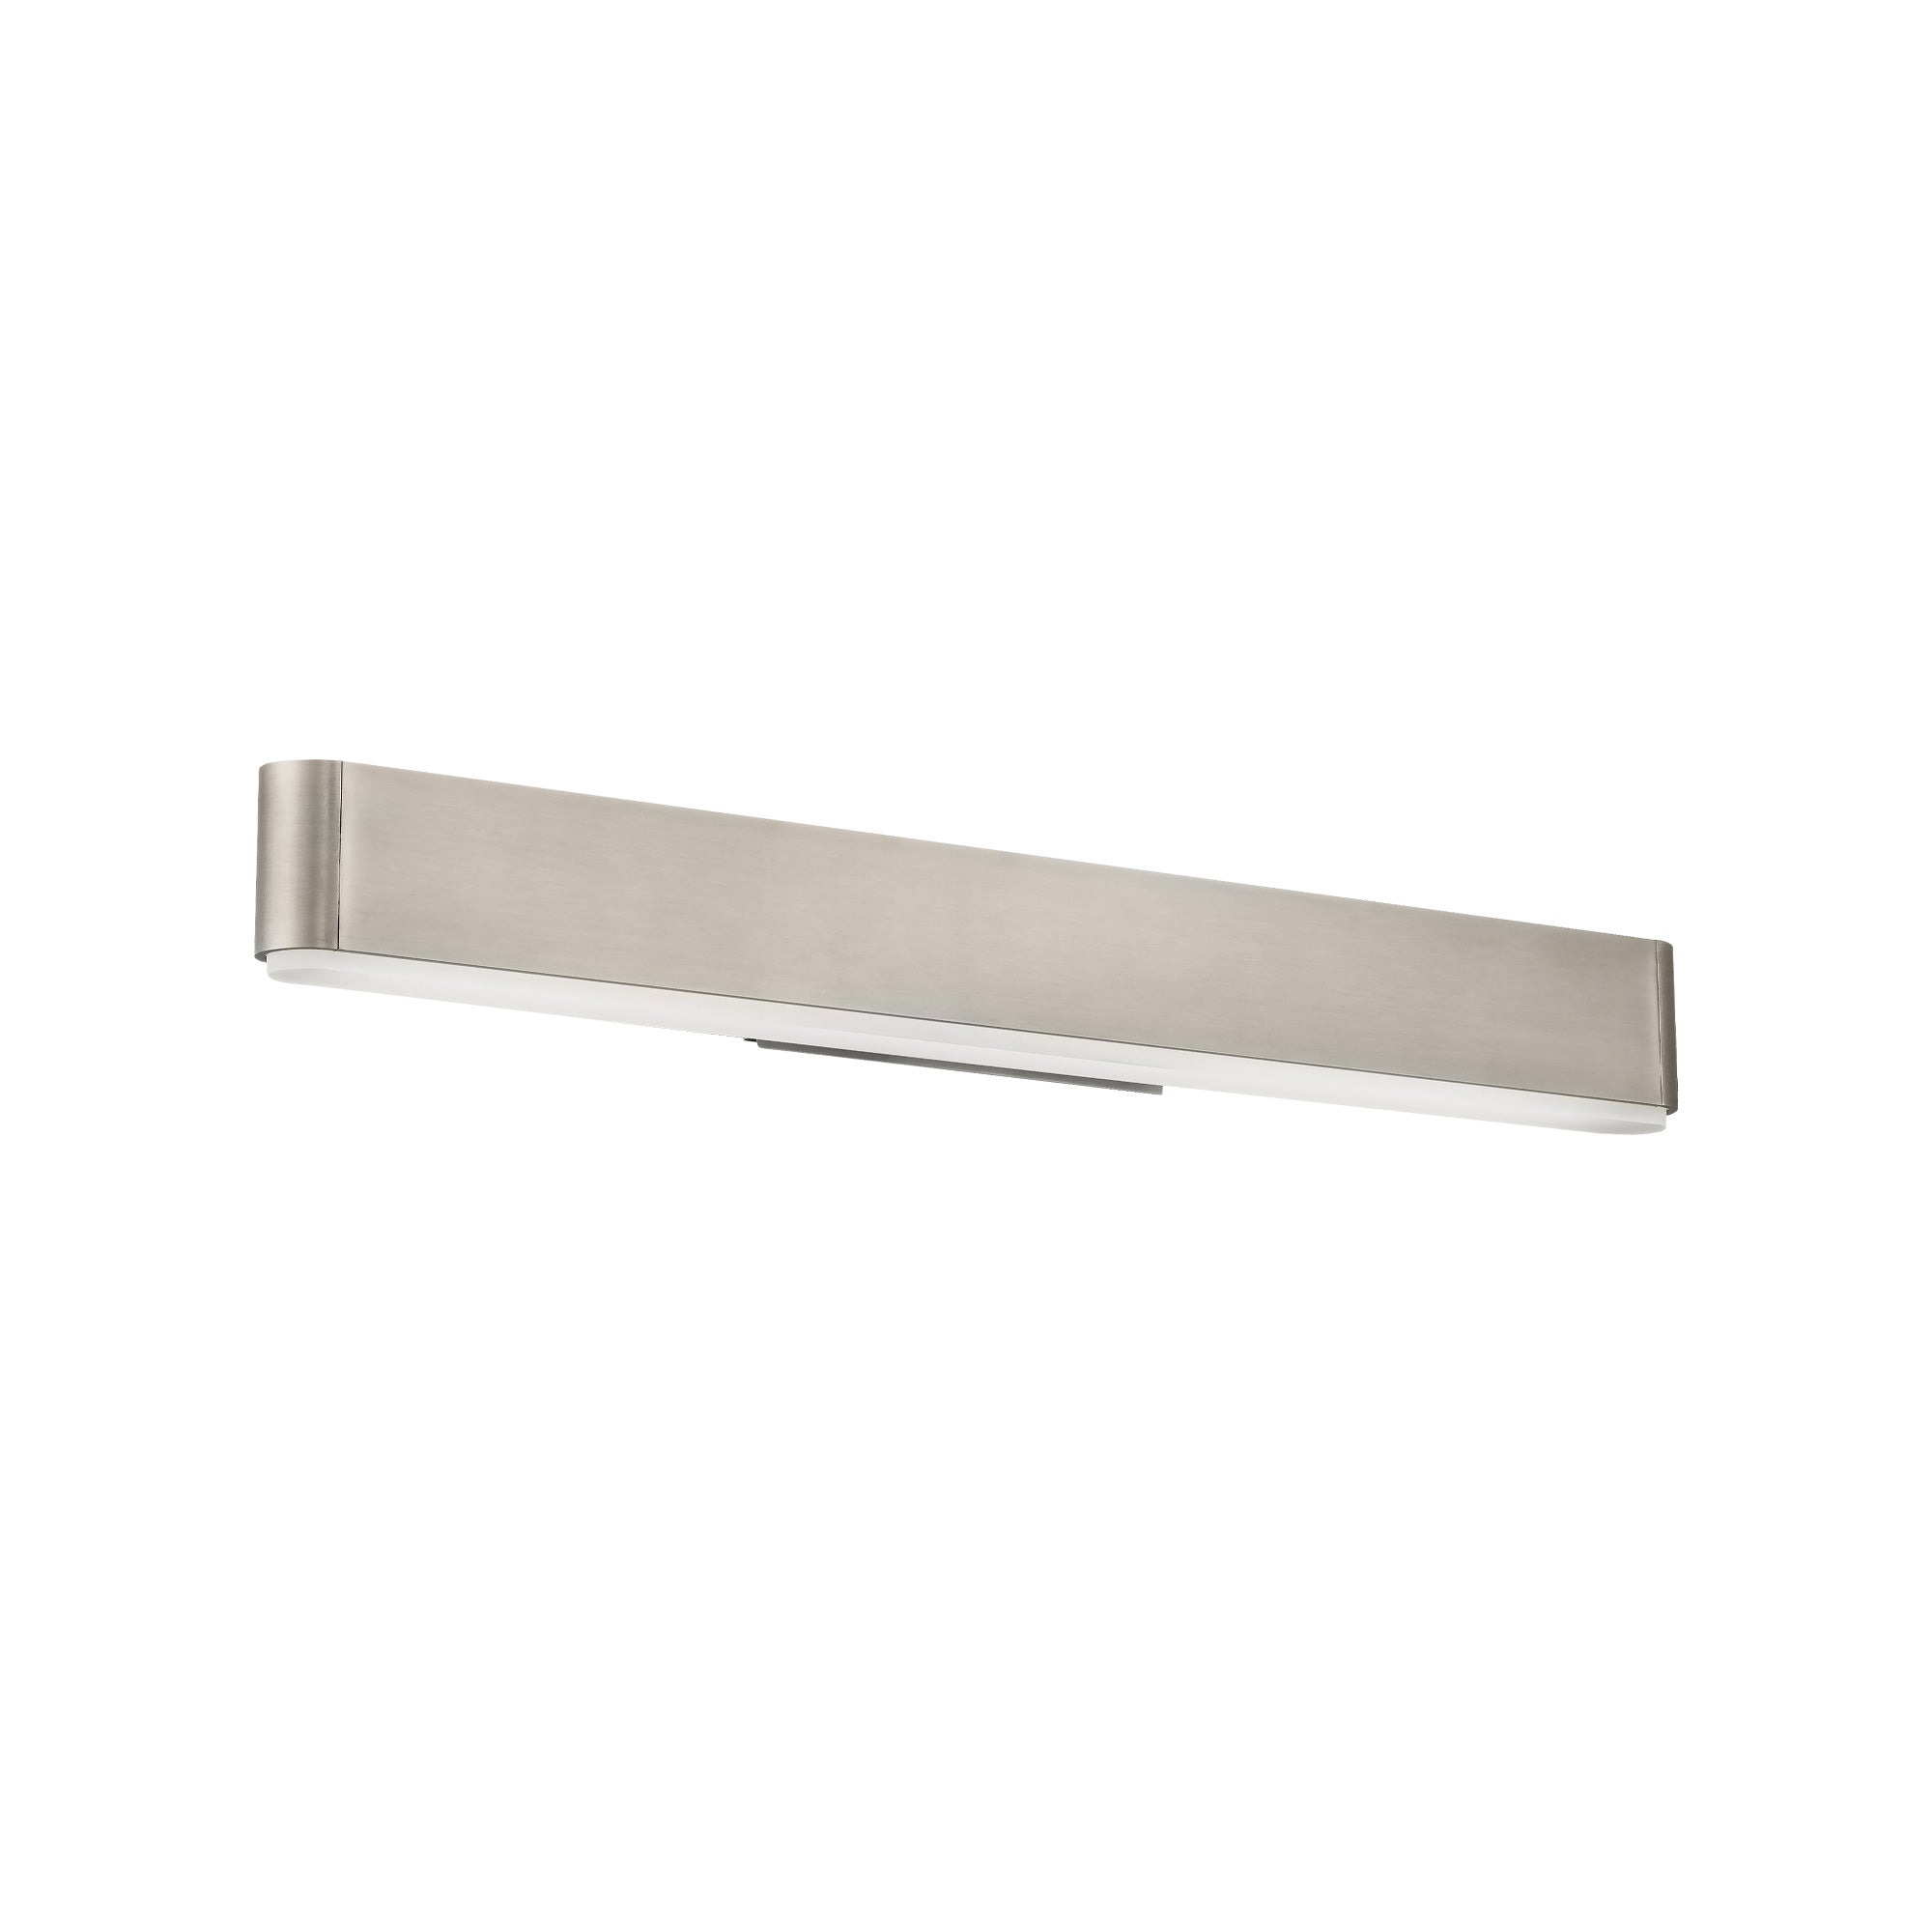 0 TO 60 Bathroom sconce Nickel INTEGRATED LED - WS-56124-27-BN | MODERN FORMS